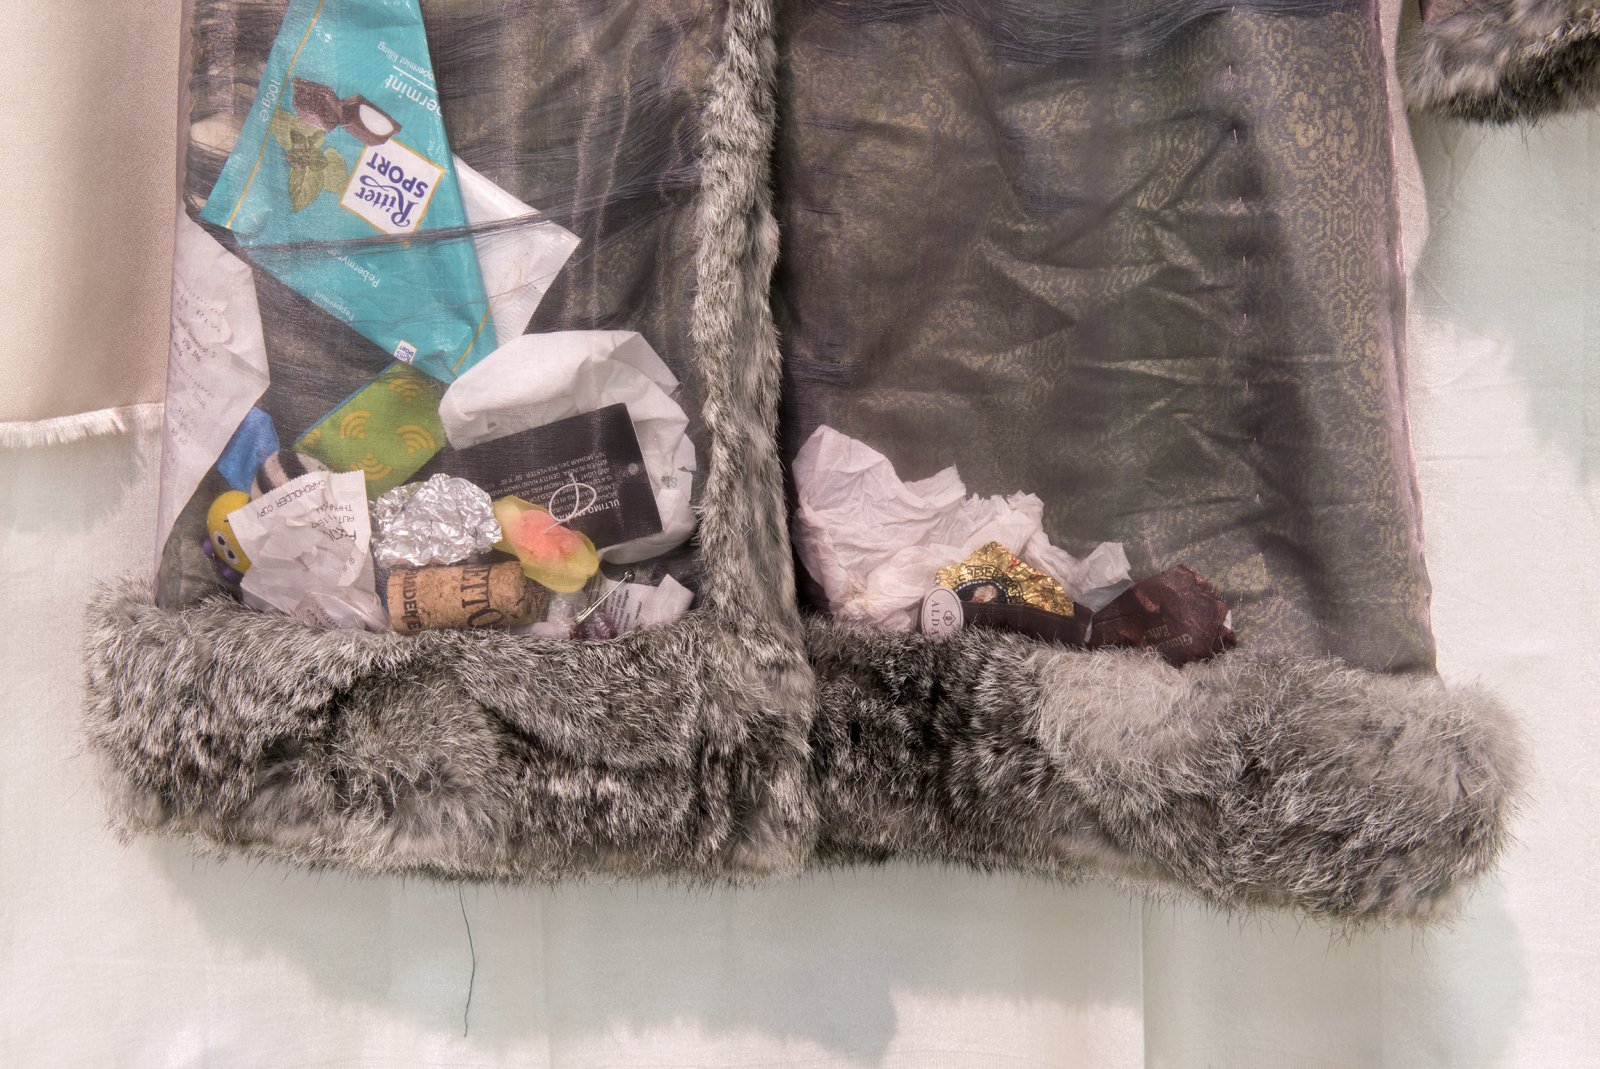 Liz Magor, Study for a Farce (detail), 2012, textile, fur, found objects, 60 x 96 x 8 in. (152 x 244 x 20 cm) by Liz Magor